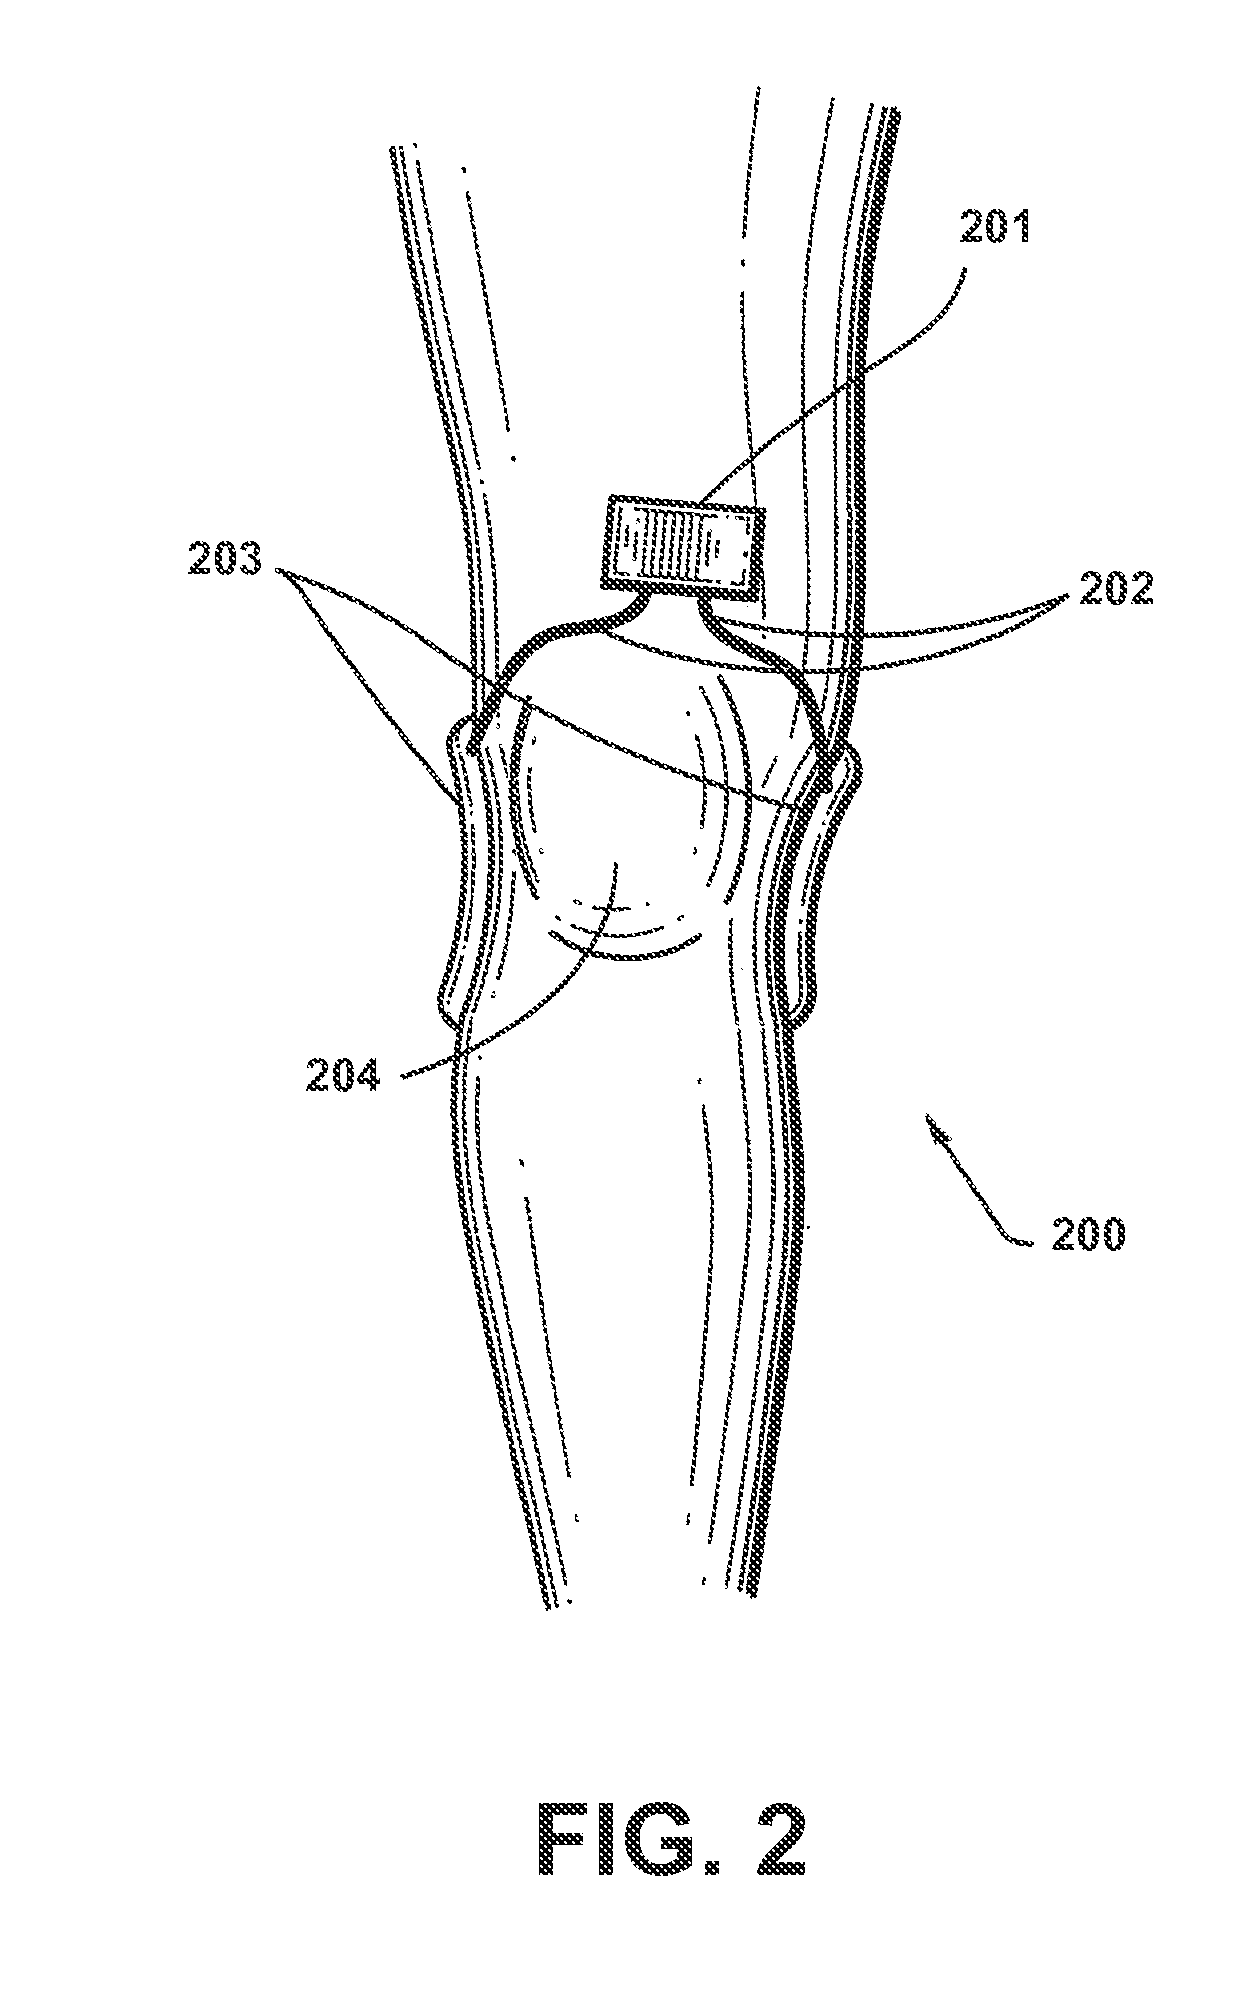 Apparatus and method for electromagnetic treatment of neurological injury or condition caused by a stroke